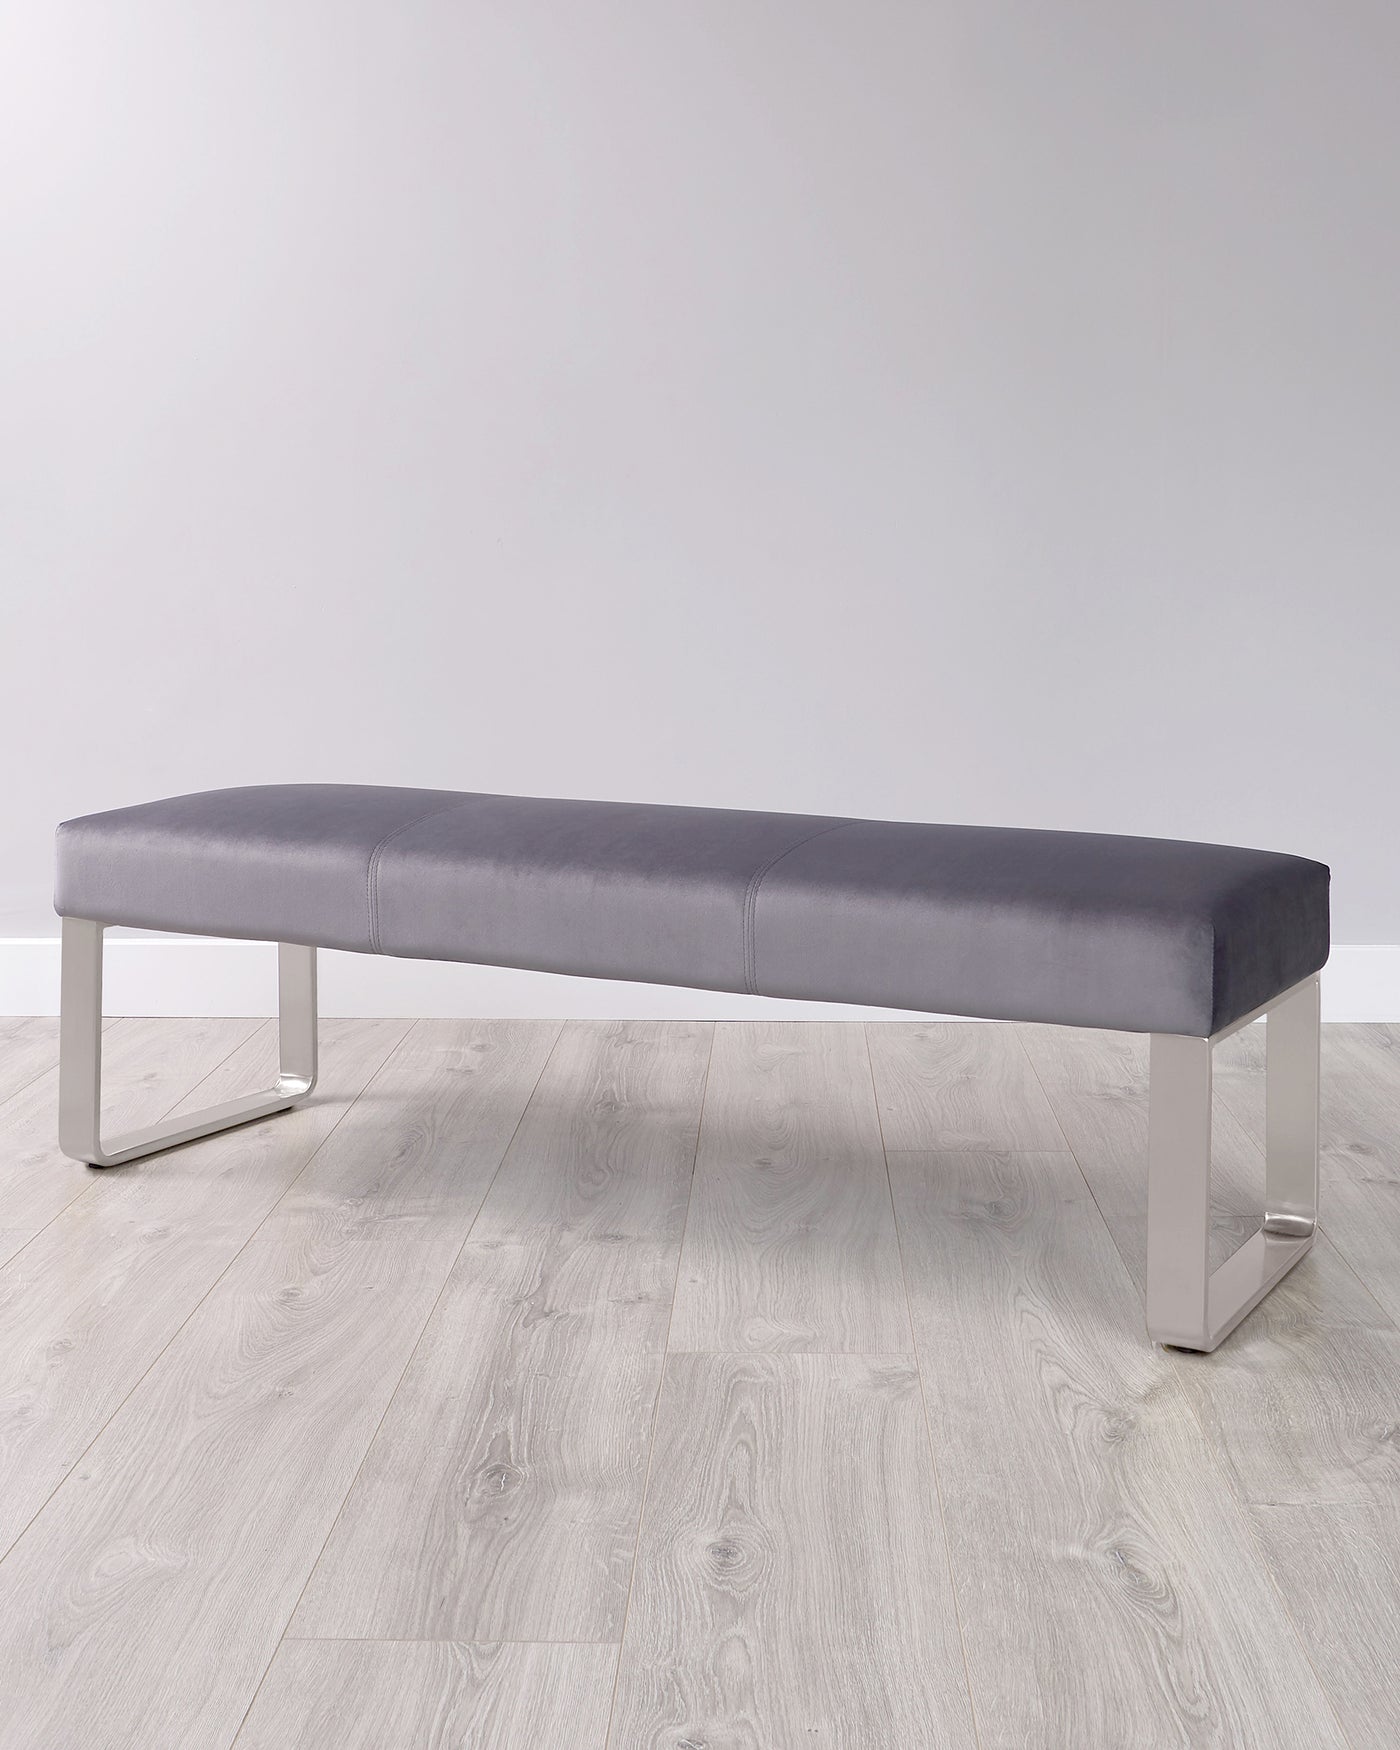 Ophelia 3 Seater Dark Grey Velvet Stainless Steel Bench Without Backrest